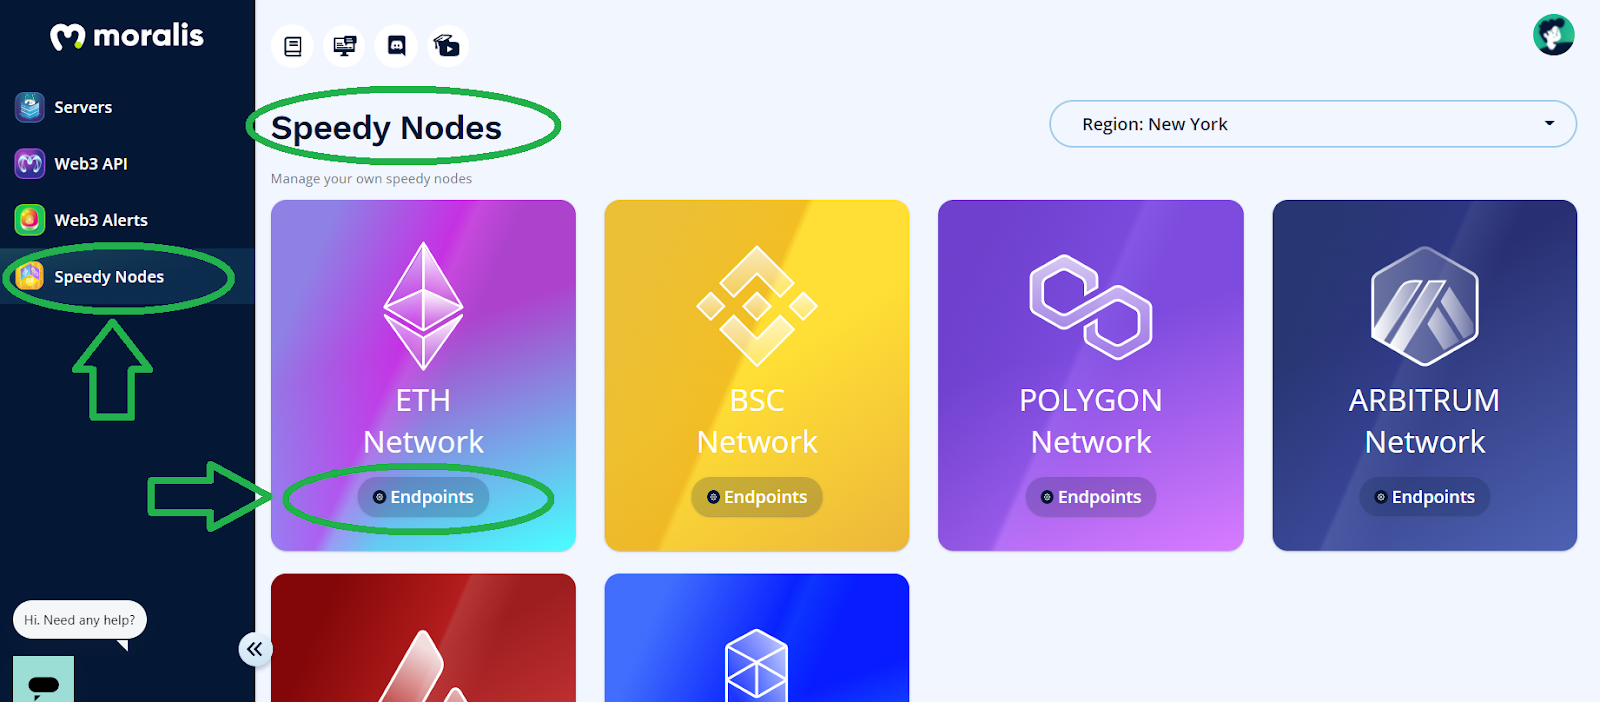 Moralis Speedy Nodes admin panel showing network options to choose from when creating a cryptocurrency.